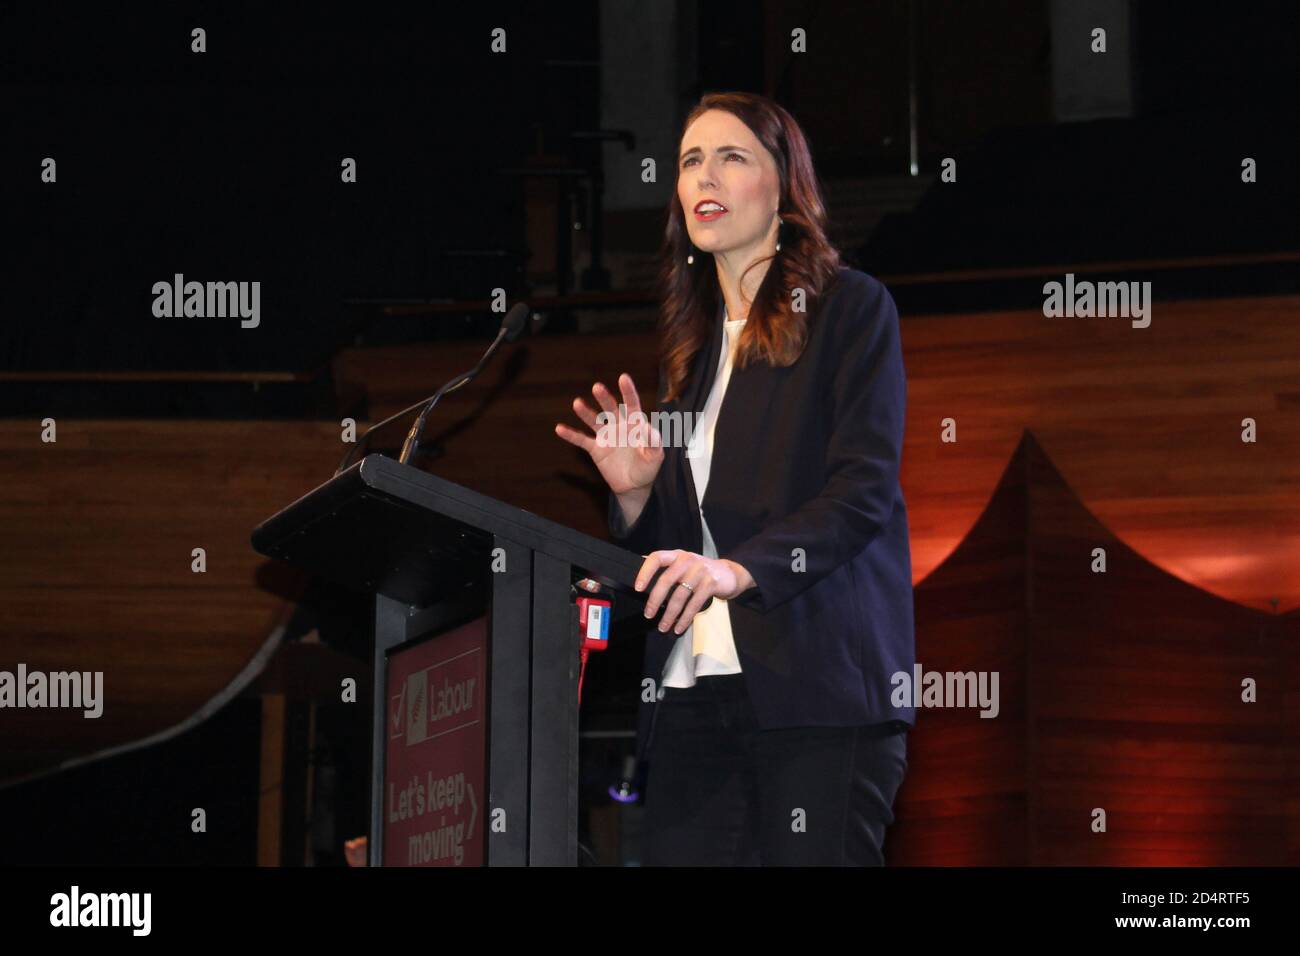 Prime Minister Jacinda Ardern addresses her supporters at a Labour Party event in Wellington, New Zealand, October 11, 2020. REUTERS/Praveen Menon Stock Photo